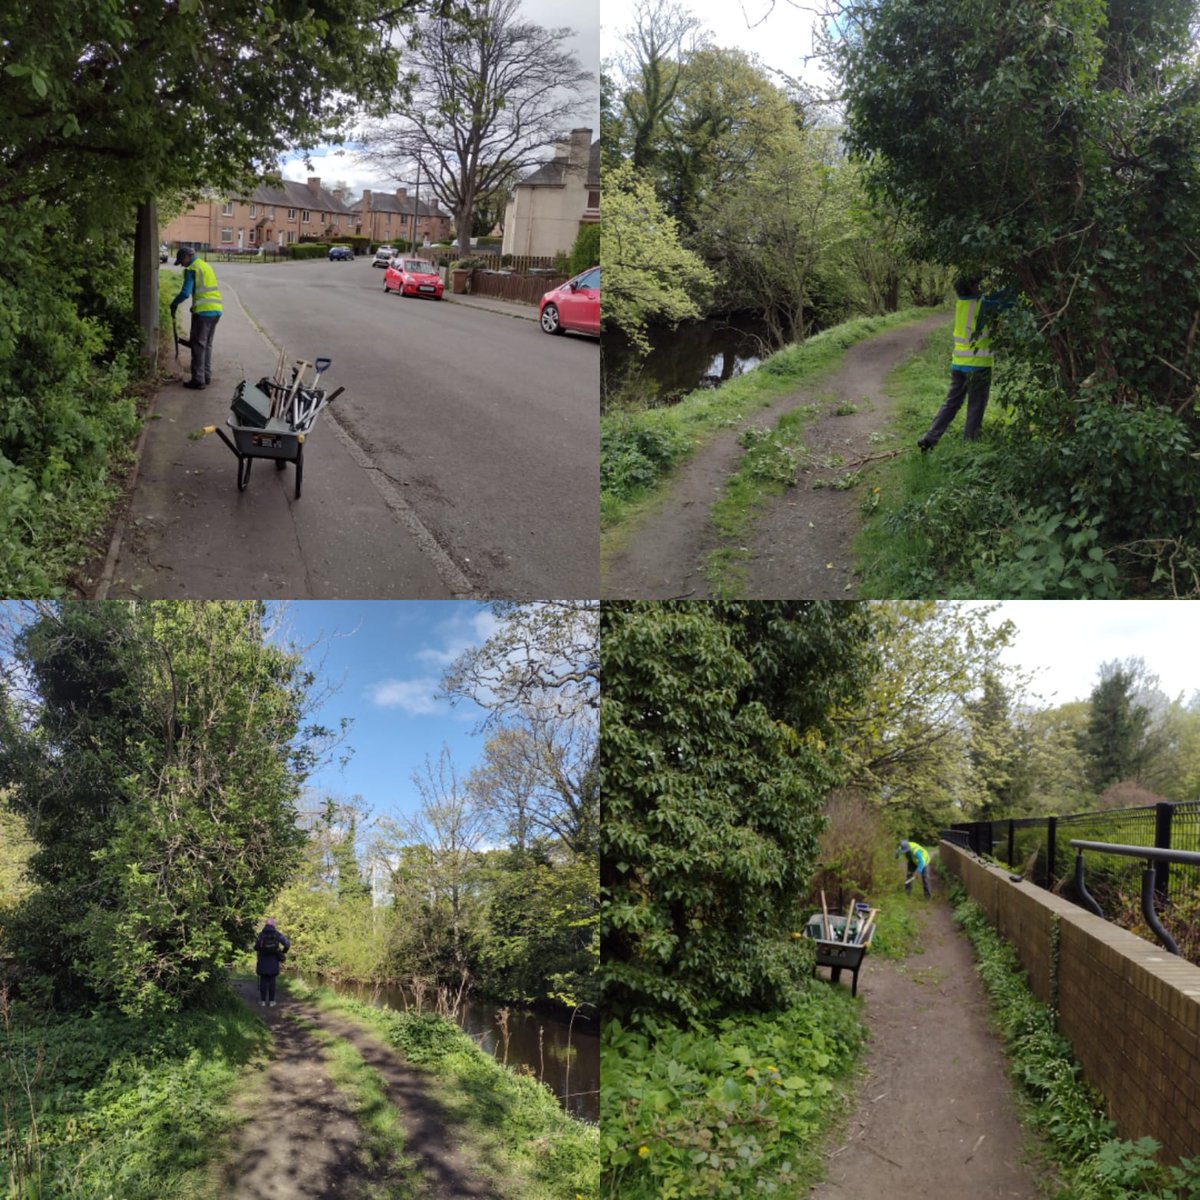 4th day of spraying #GiantHogweed this week for our trained team with 1449 seedlings treated to date. In addition another pile of rubbish collected locally by our wombles and a trim back of the paths from Fords Rd to Saughton weir @Edinburgh_CC #INNS @KSBScotland @PathsforAll